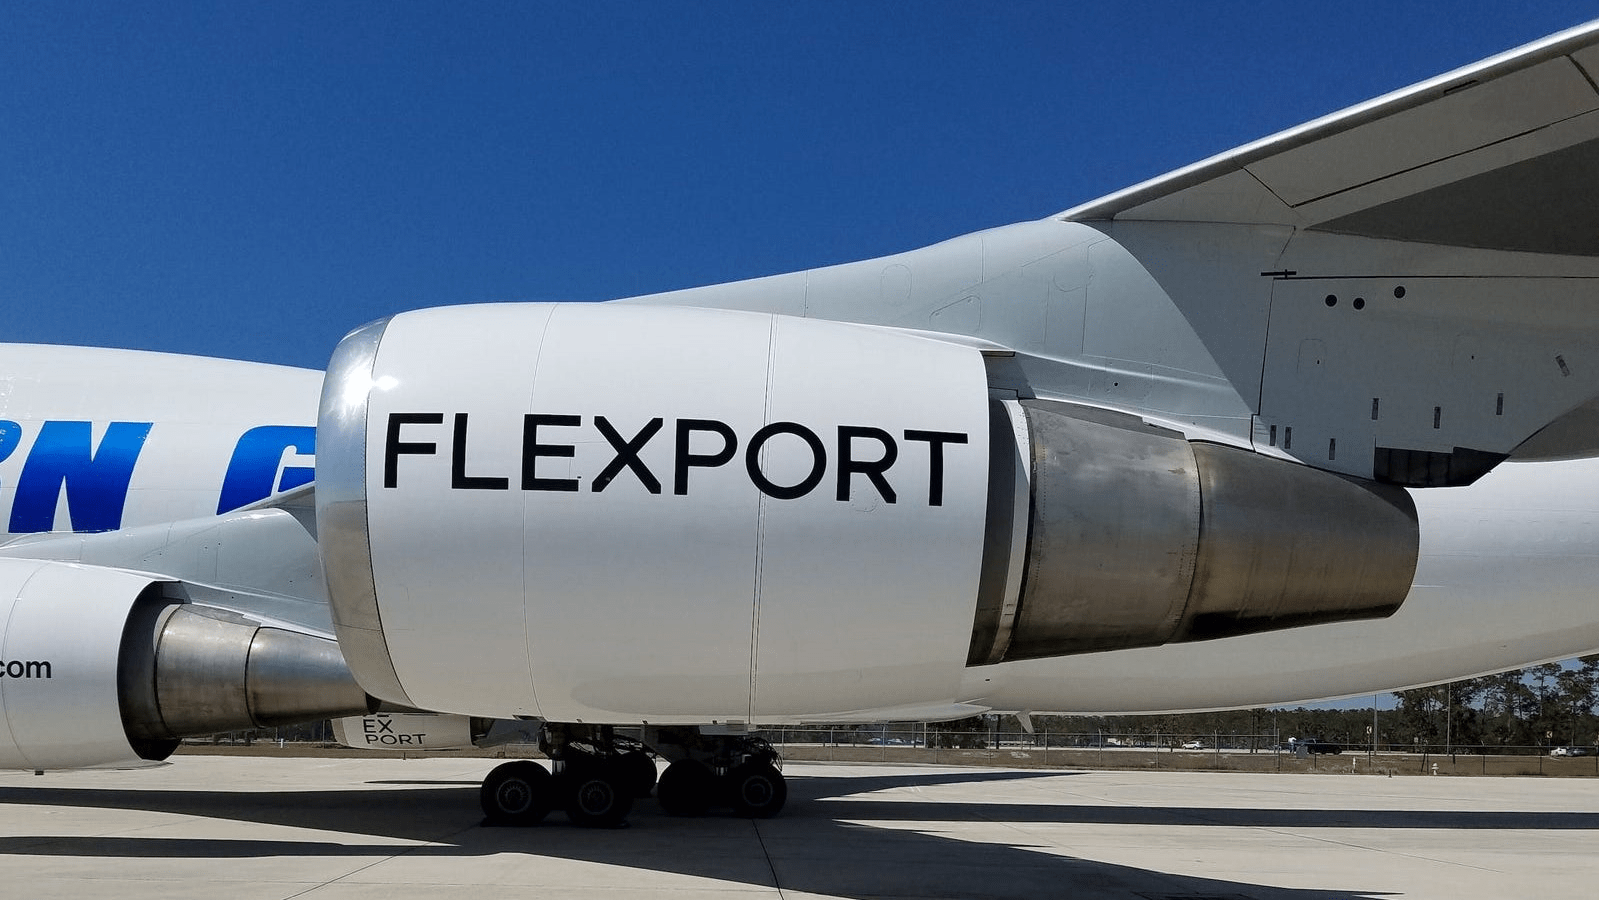 Logistics giant Flexport acquired BTC as part of its reserves